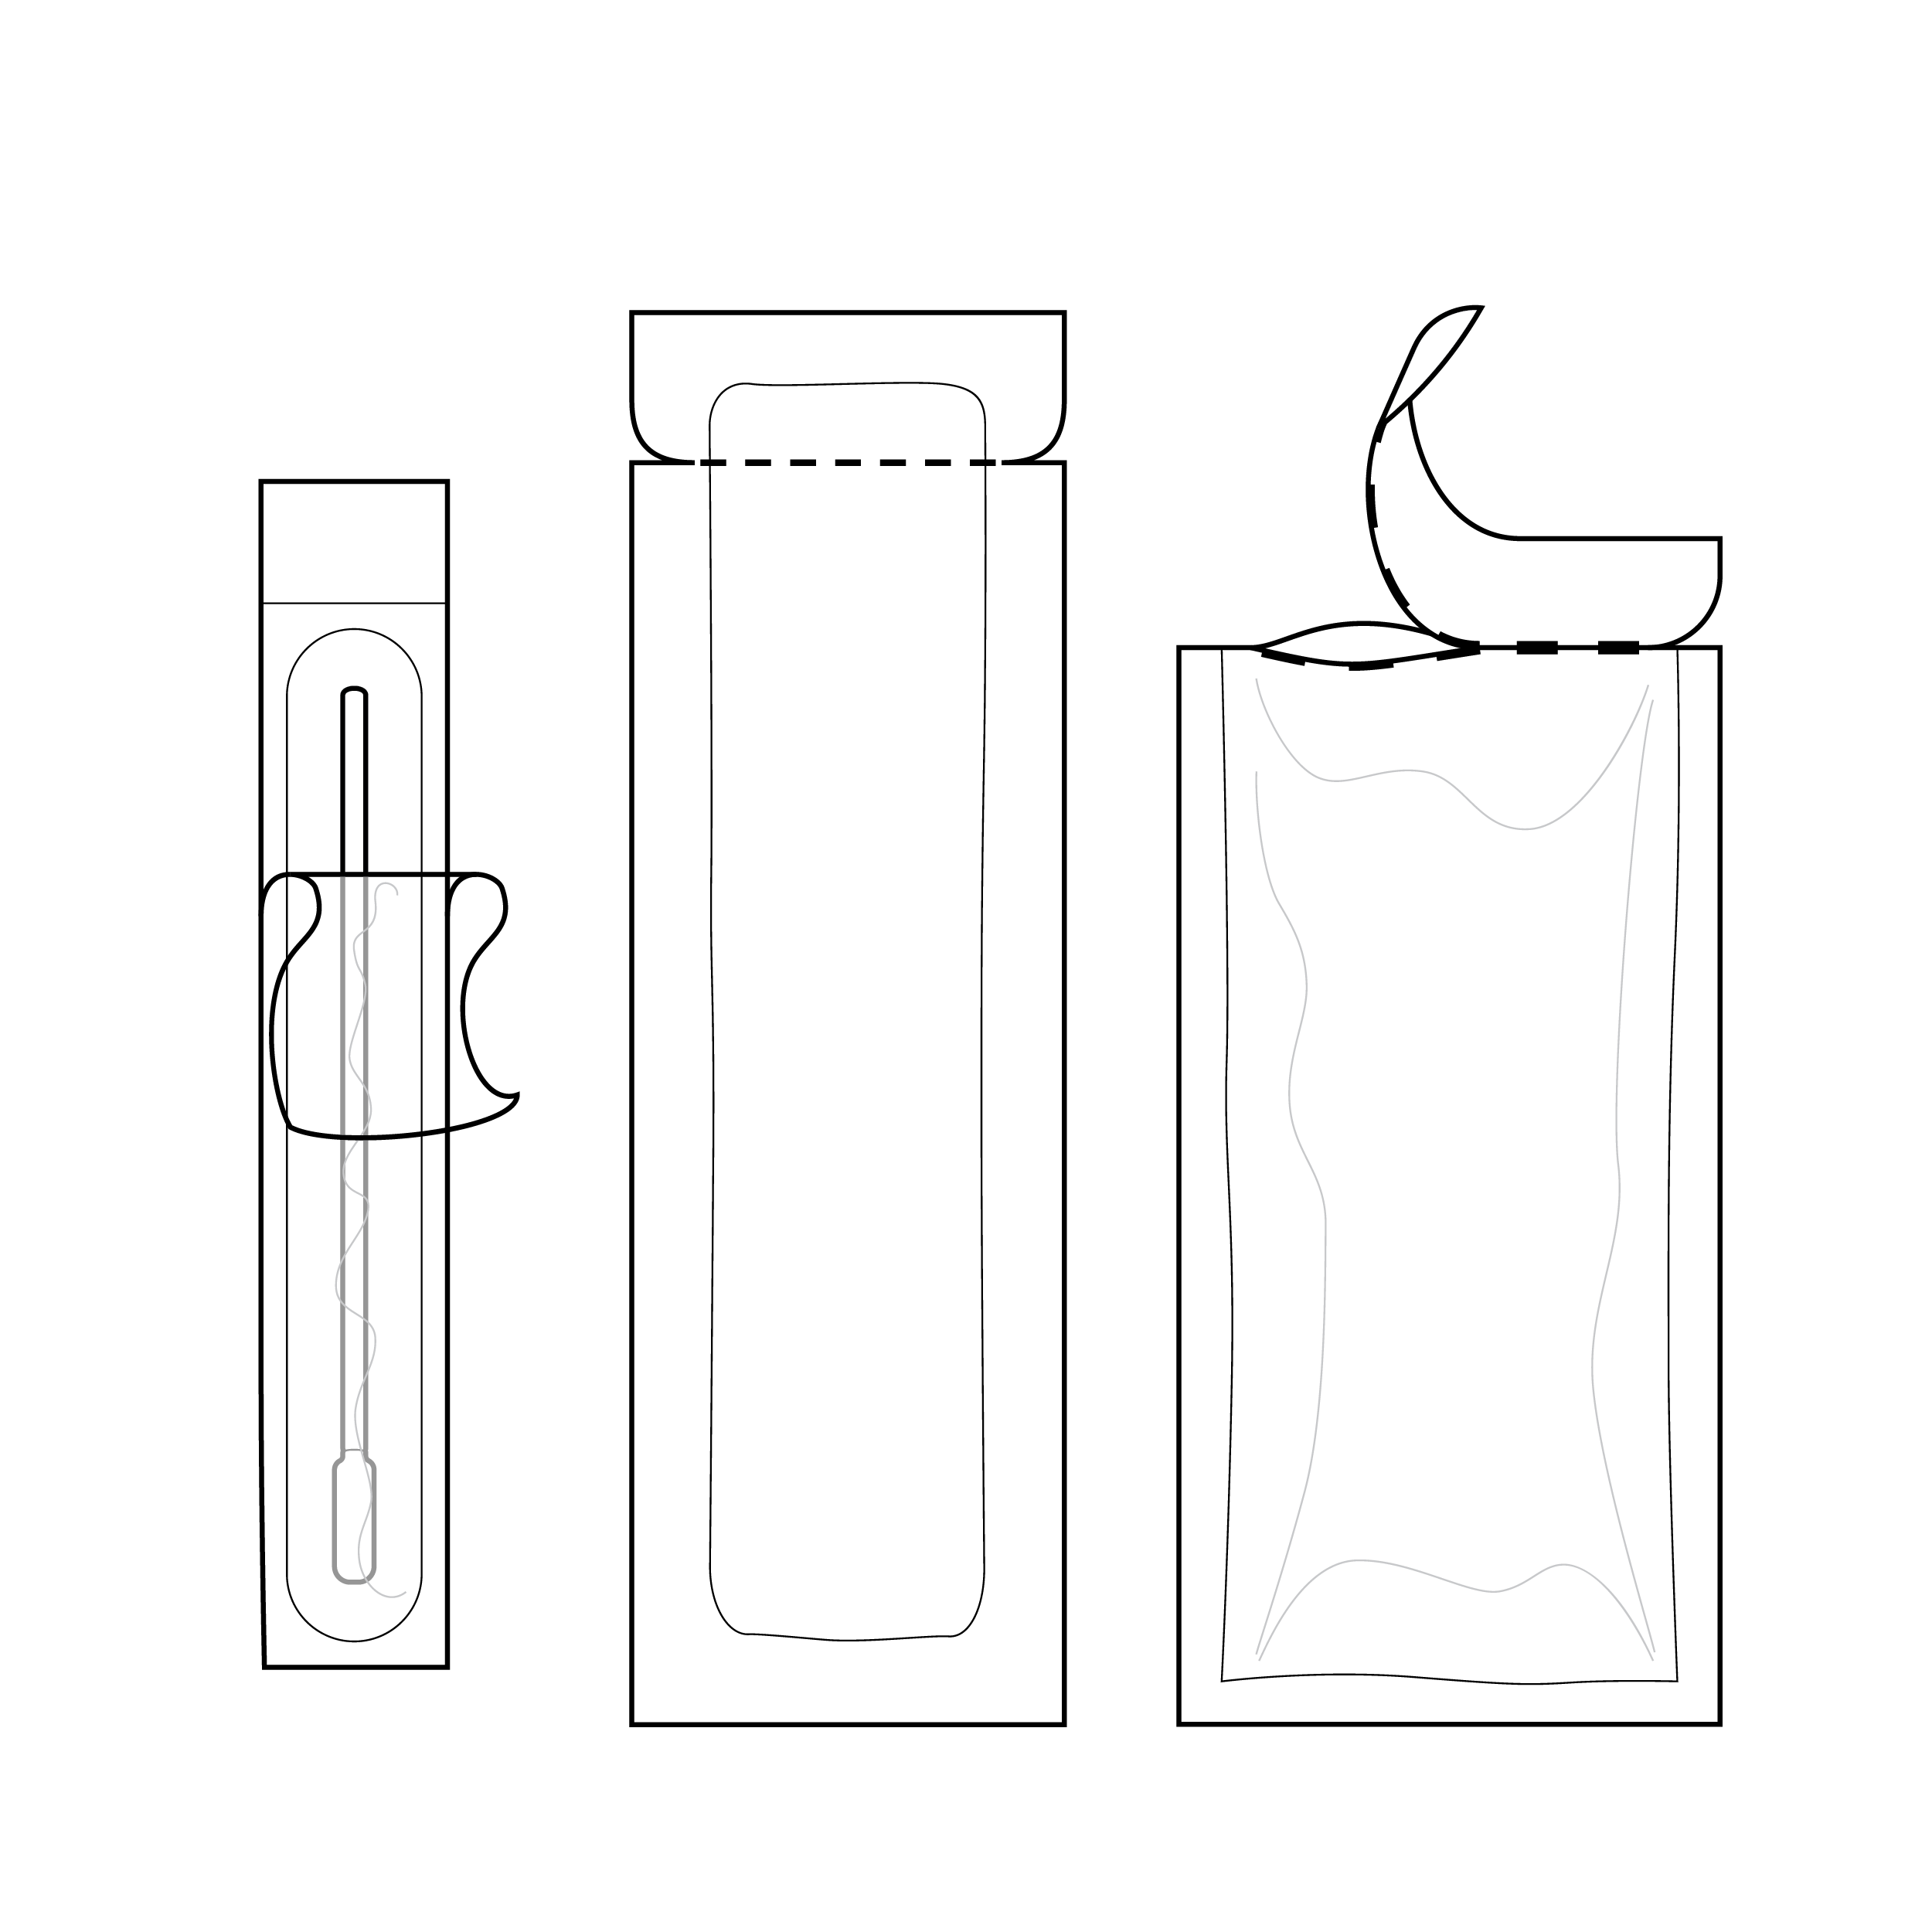 Line drawings of swab pouch, cassette pouch, and fluid vial pouch.